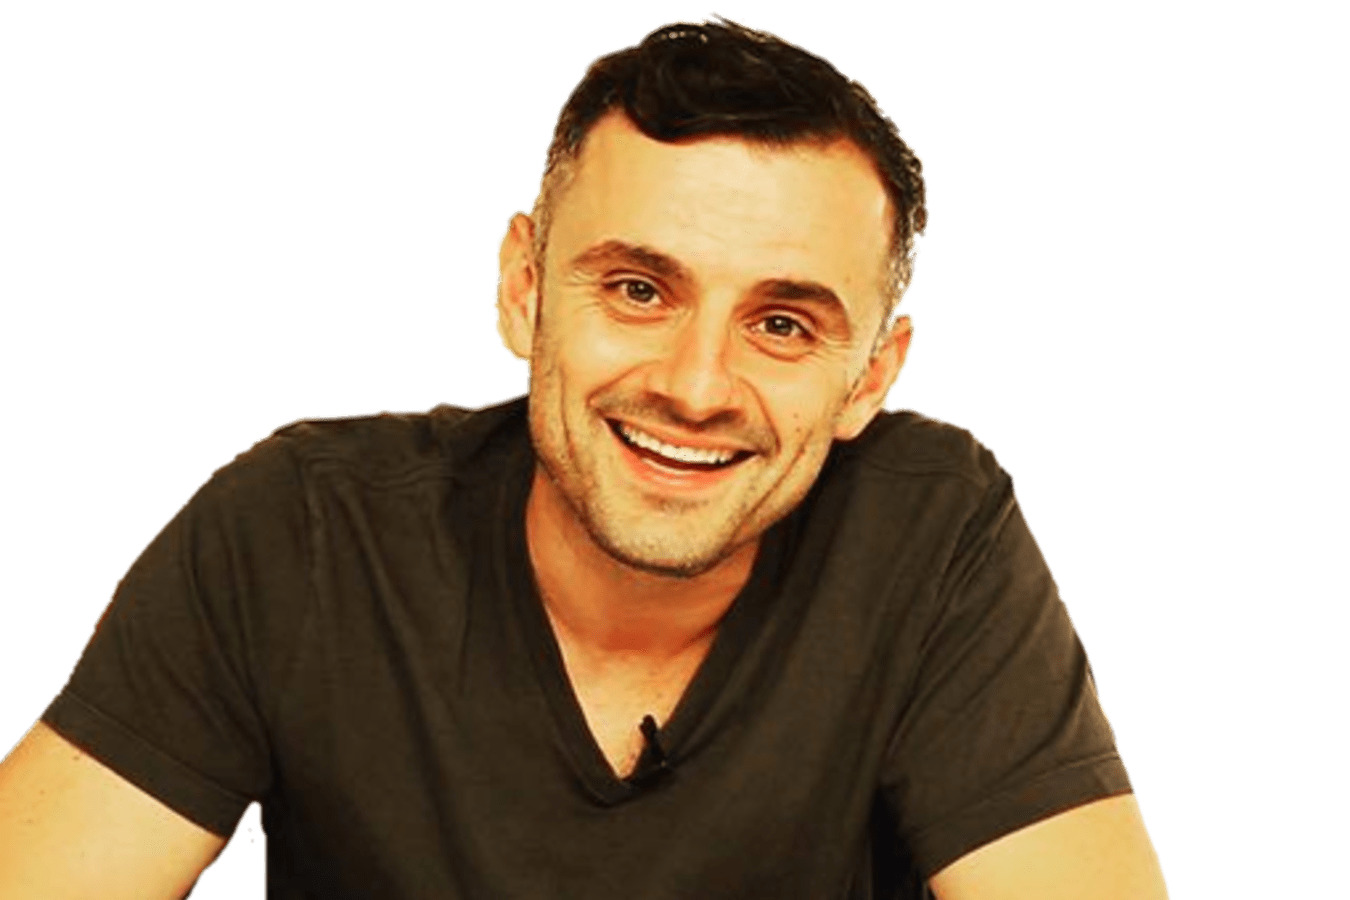 Gary Vee Smiling png icons